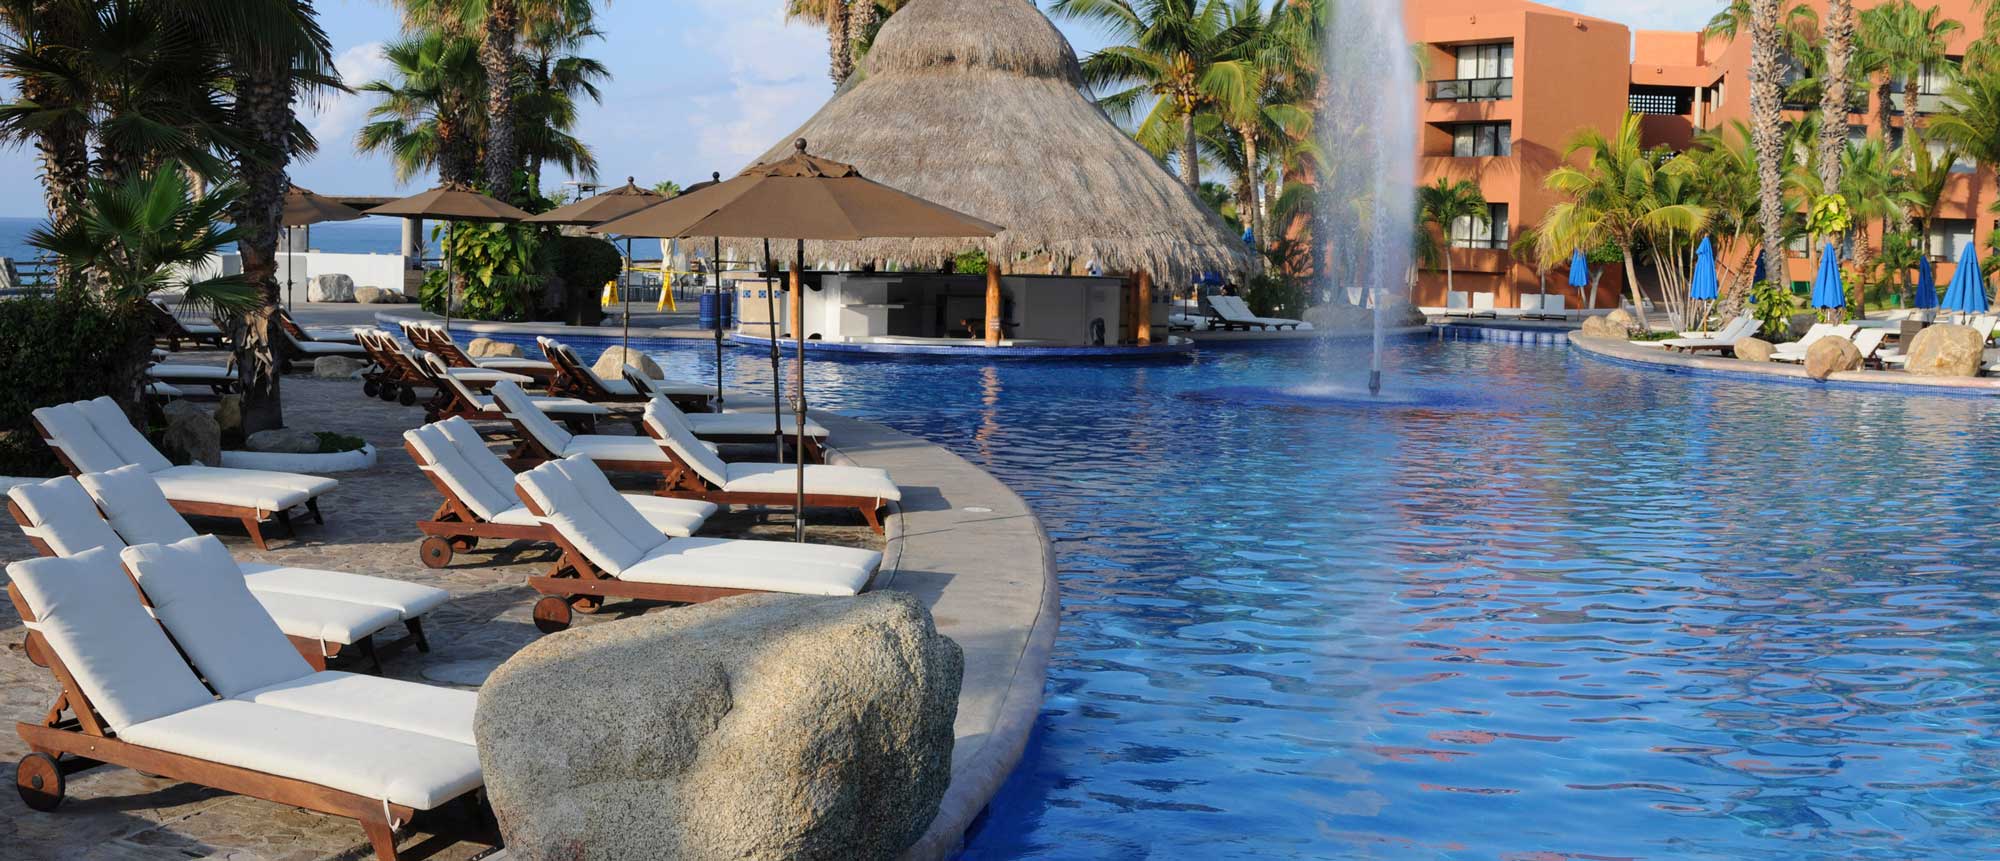 Best All-Inclusive Resorts in Pacific Mexico | All-Inclusive Weddings & Honeymoons | Puerto Vallarta Resorts | Melia Cabo Real All Inclusive Beach & Golf Resort